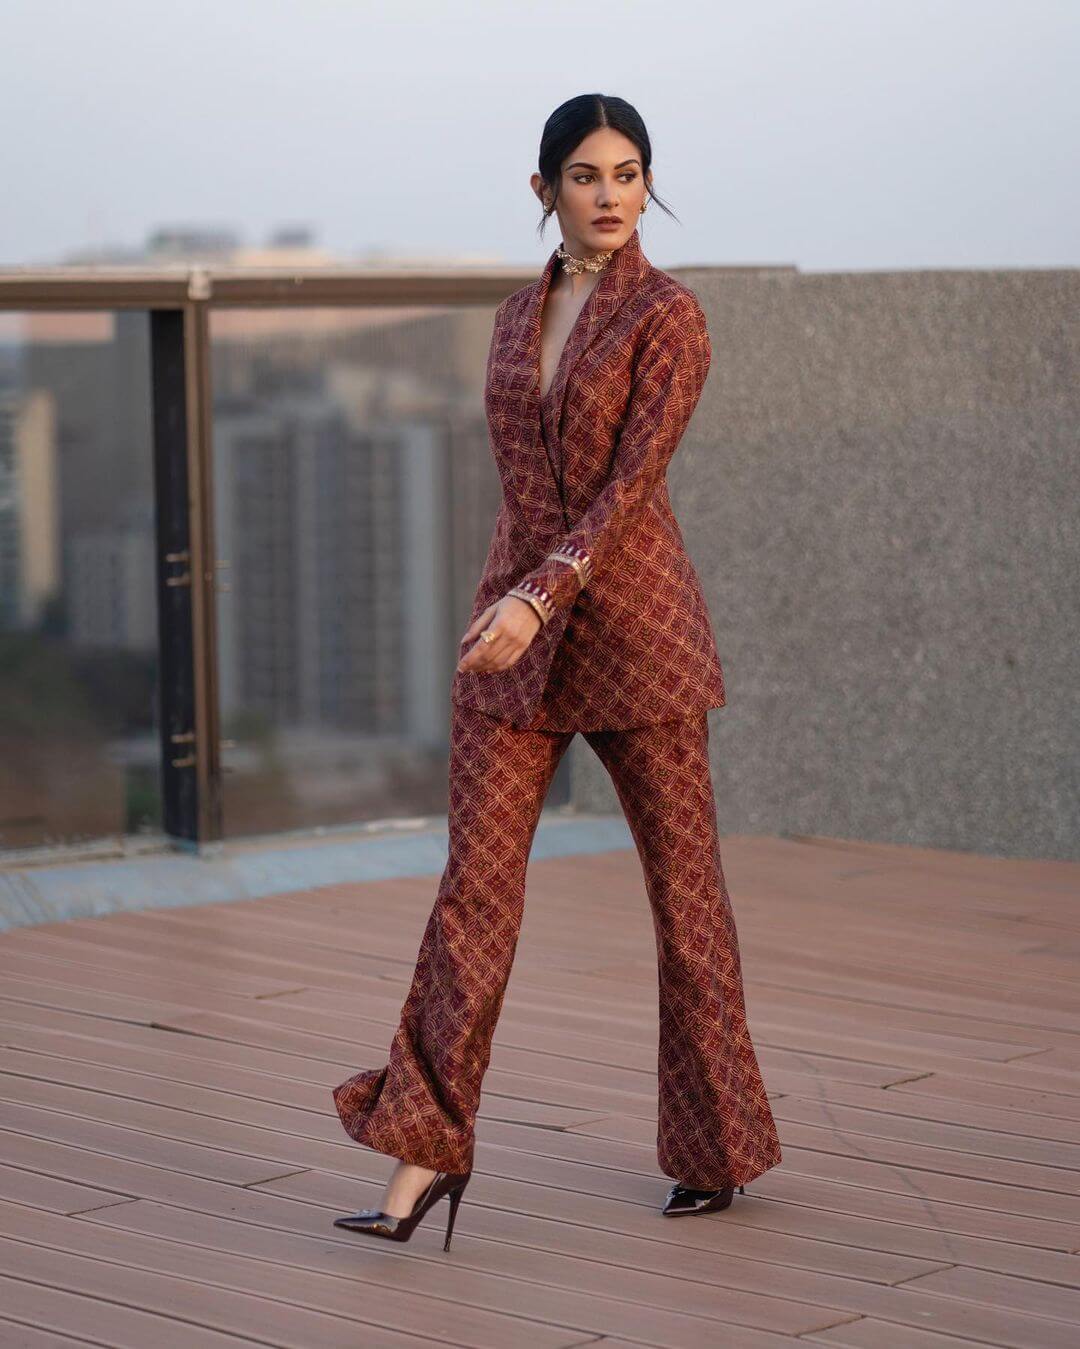 Amyra Dastur In Brown Tux Look To Add More Class